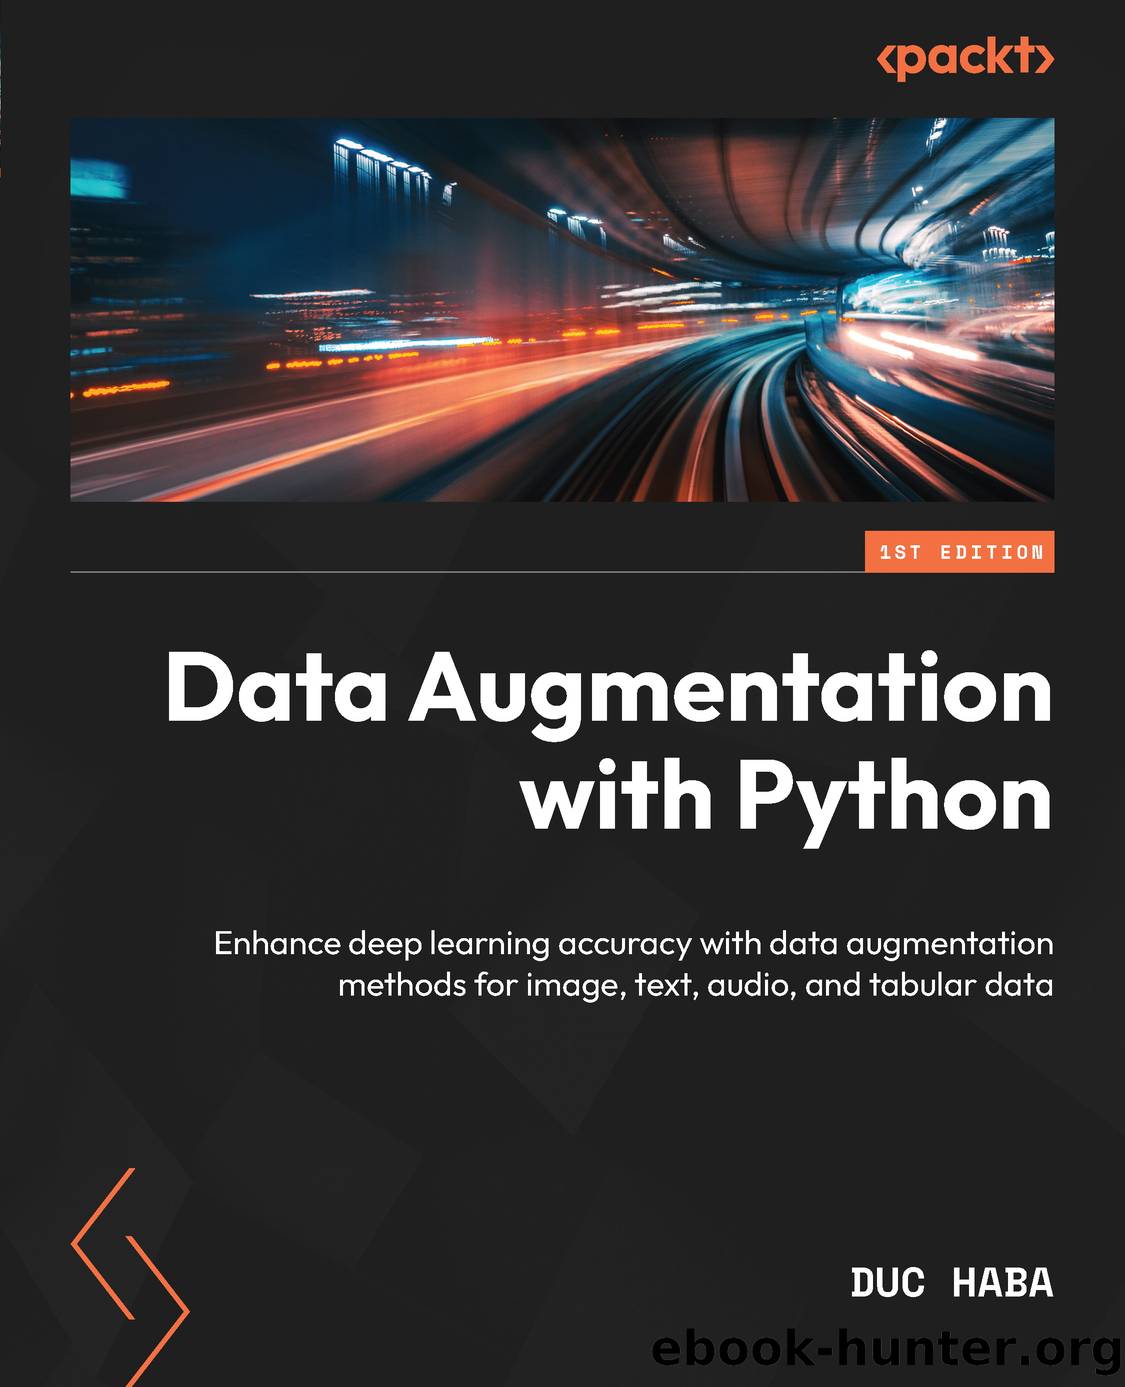 Data Augmentation with Python by Duc Haba